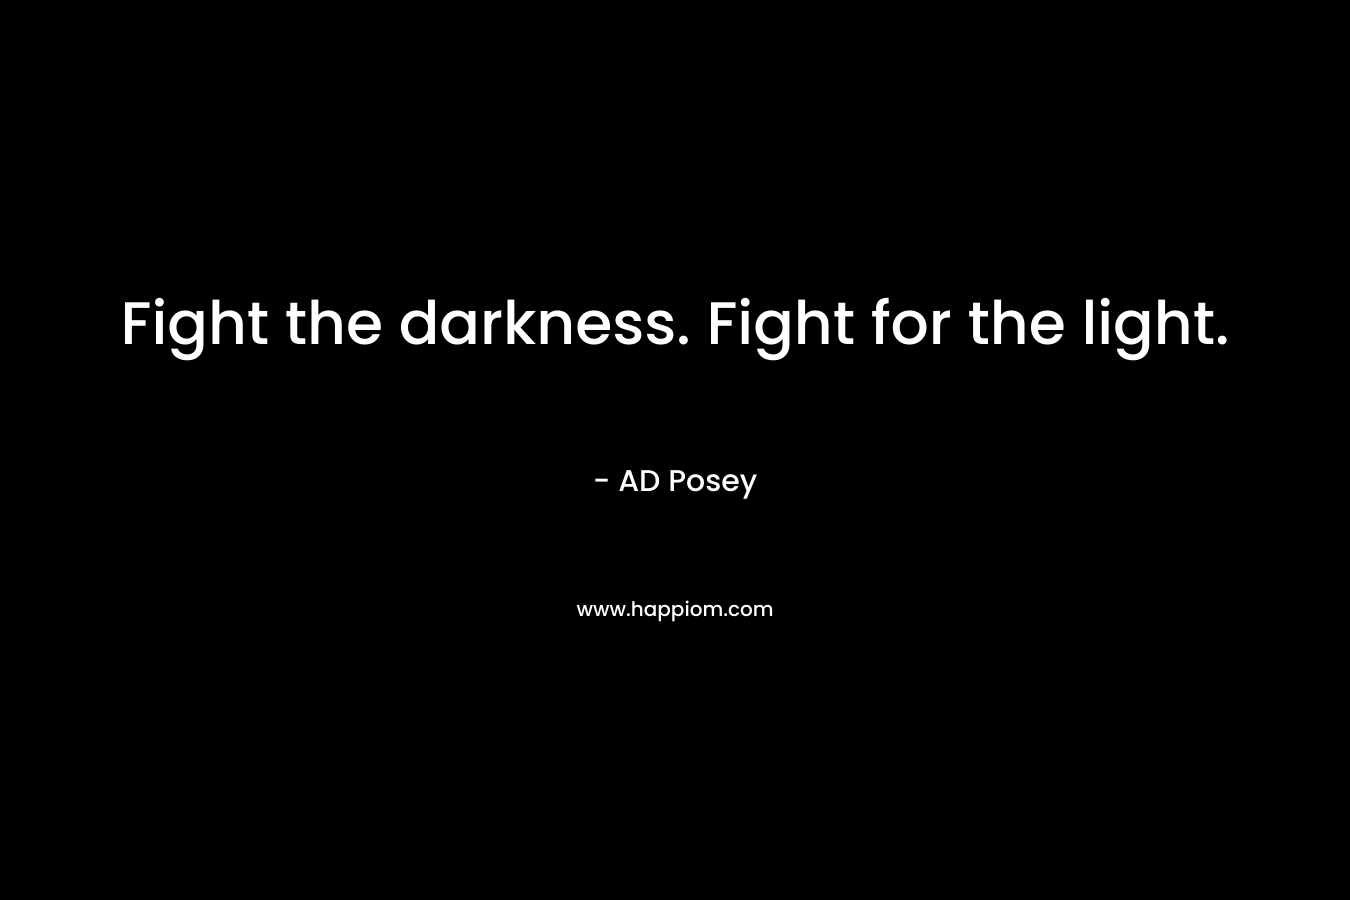 Fight the darkness. Fight for the light.